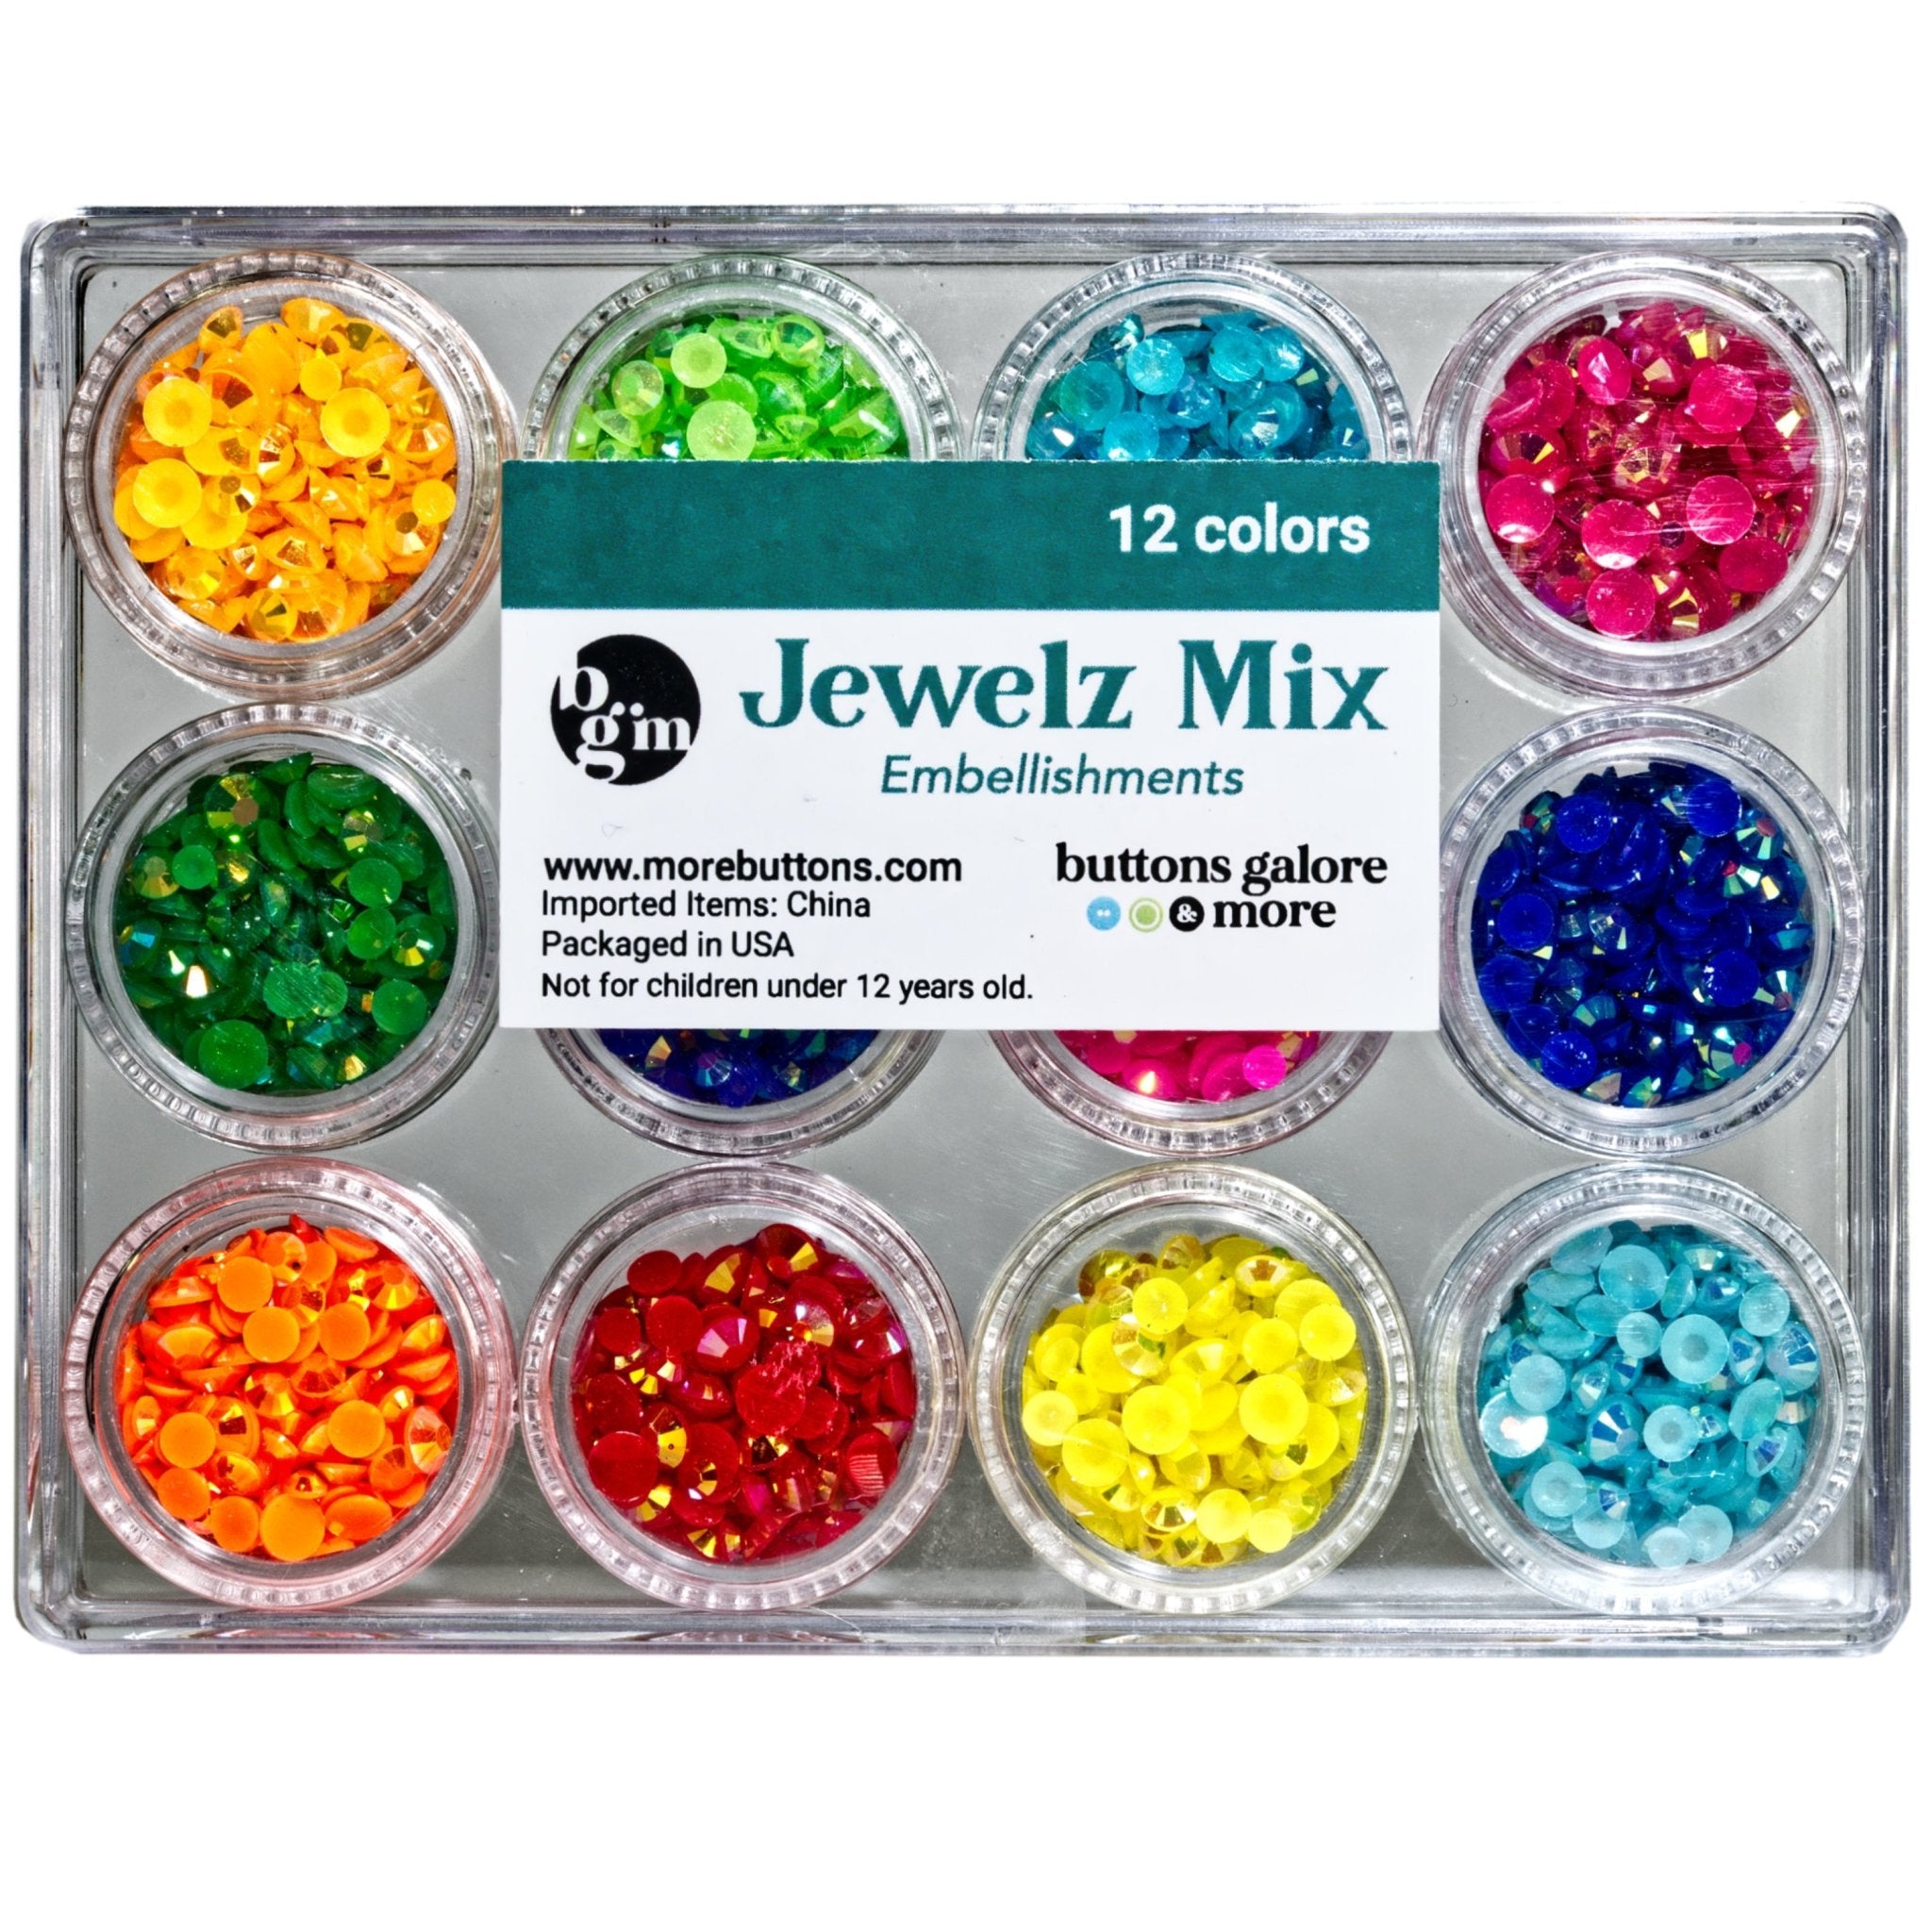 Bright colored Buttons for Crafts Sewing Scrapbooks and Quilts. Assorted  sizes including small bright colored buttons